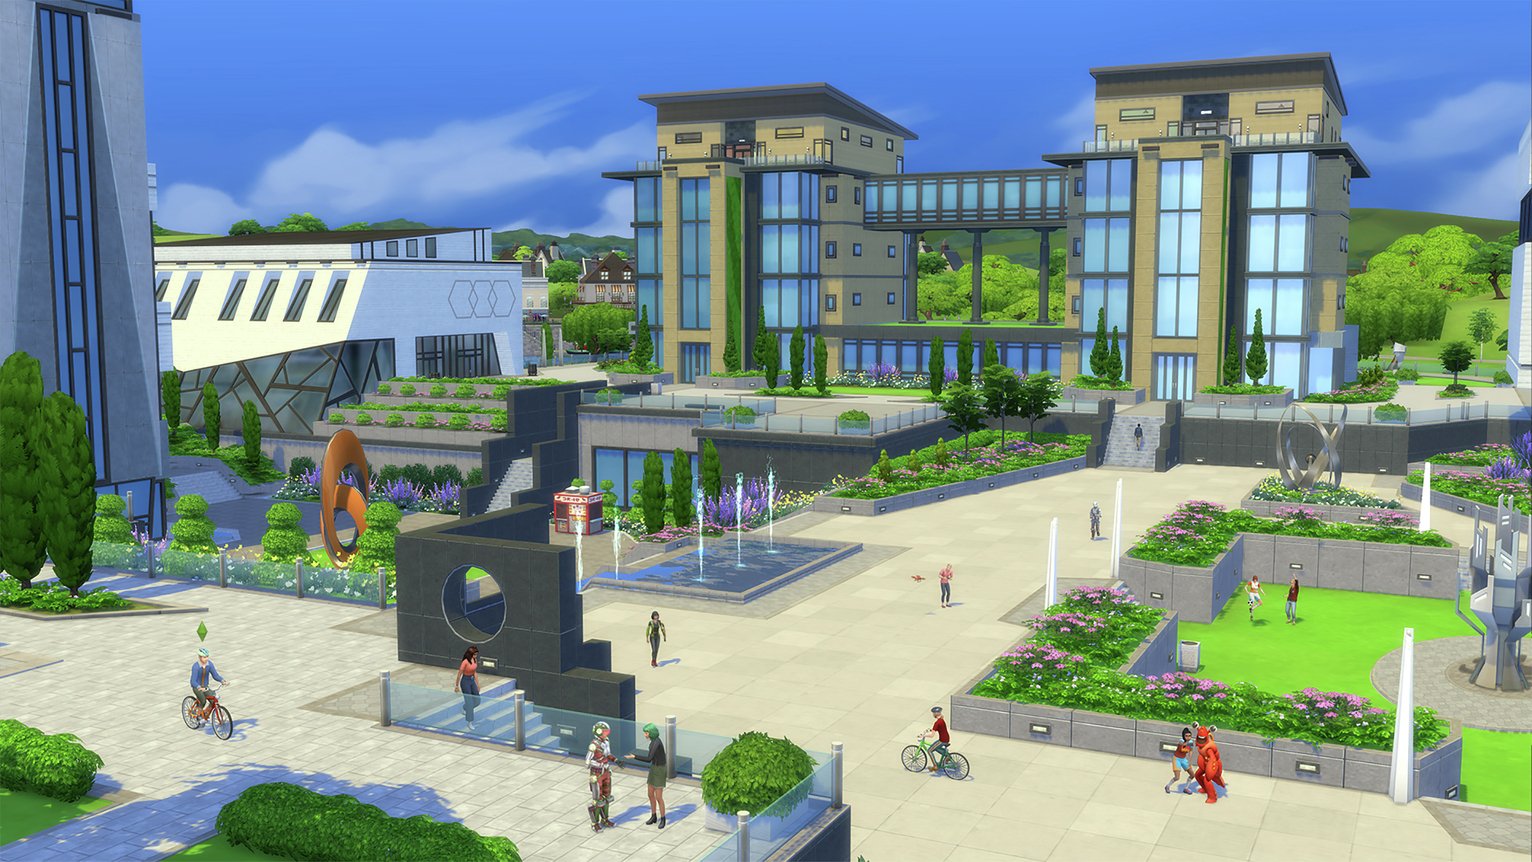 The Sims 4: Discover University Expansion Pack for PC Review